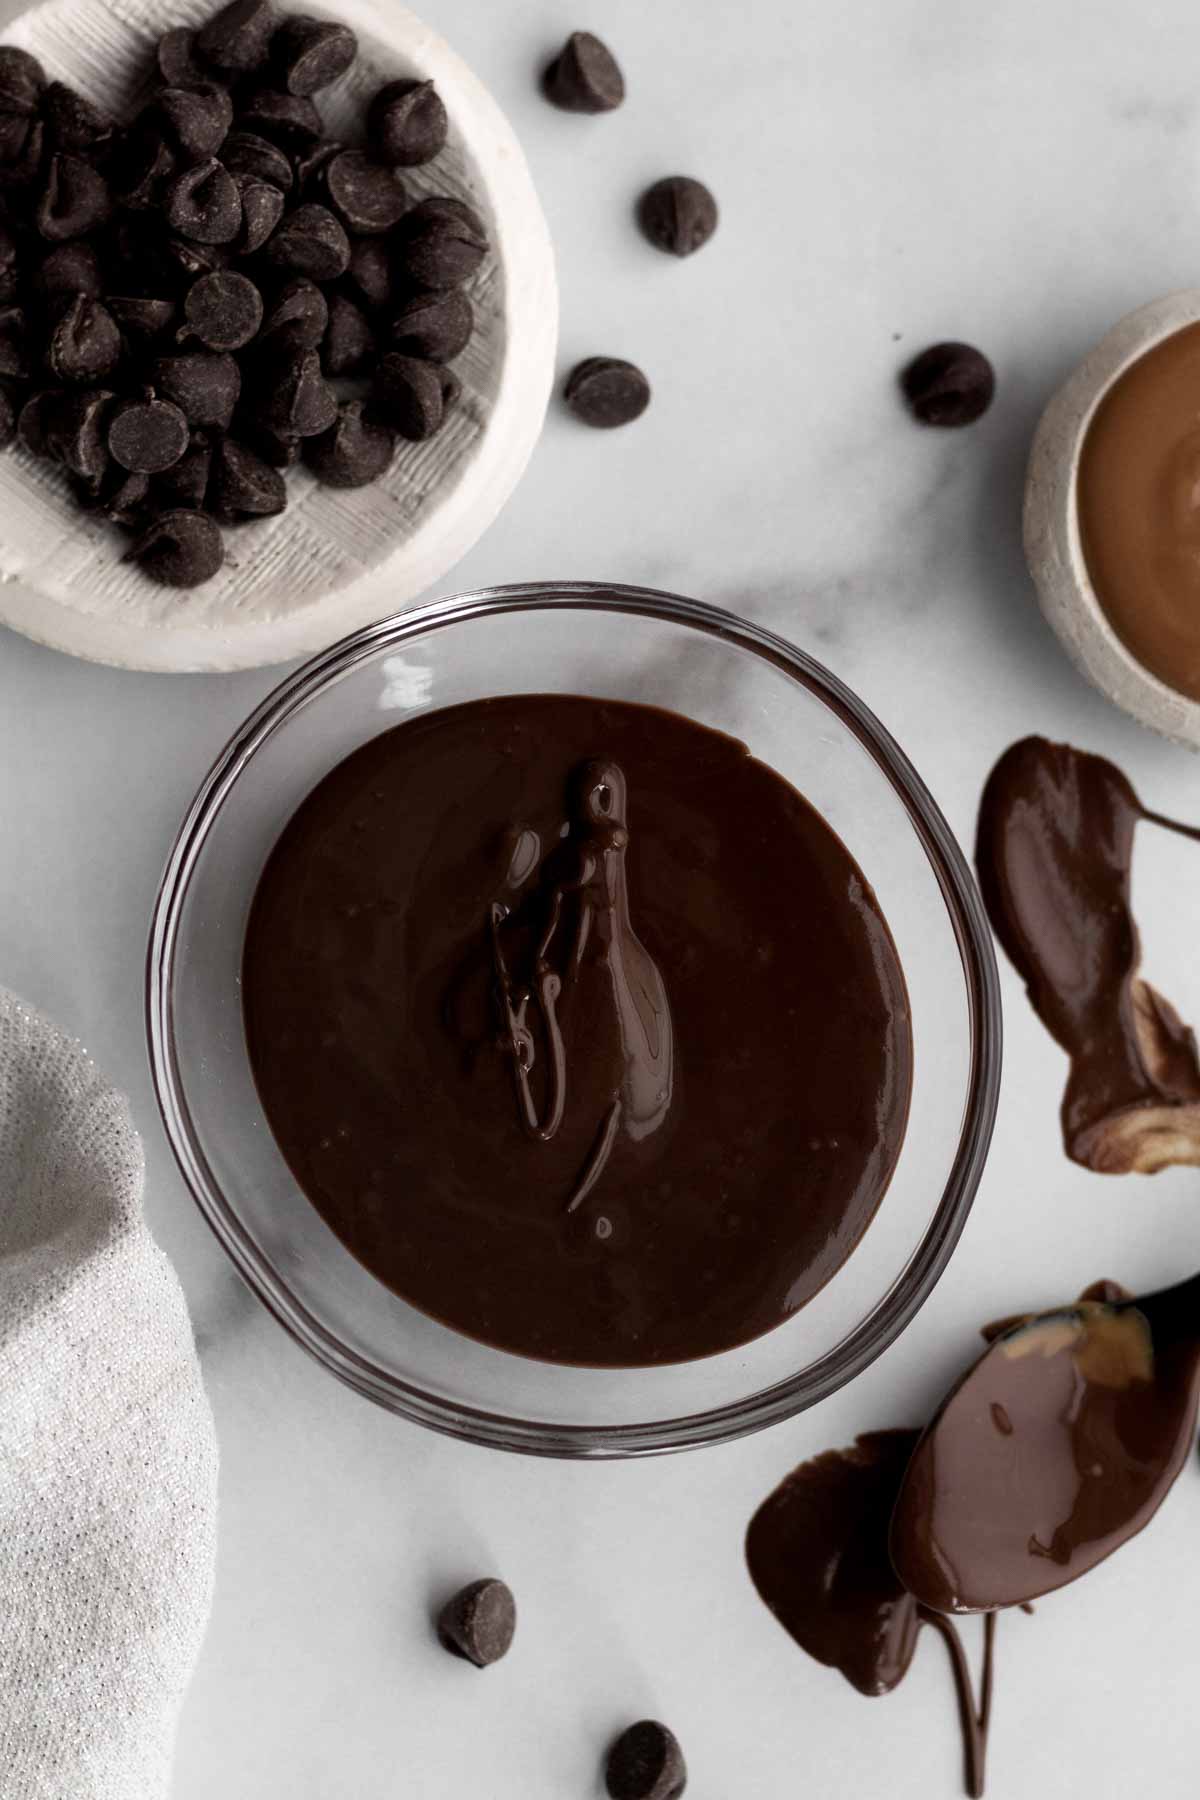 Rich melted chocolate and wow butter in a small glass bowl.